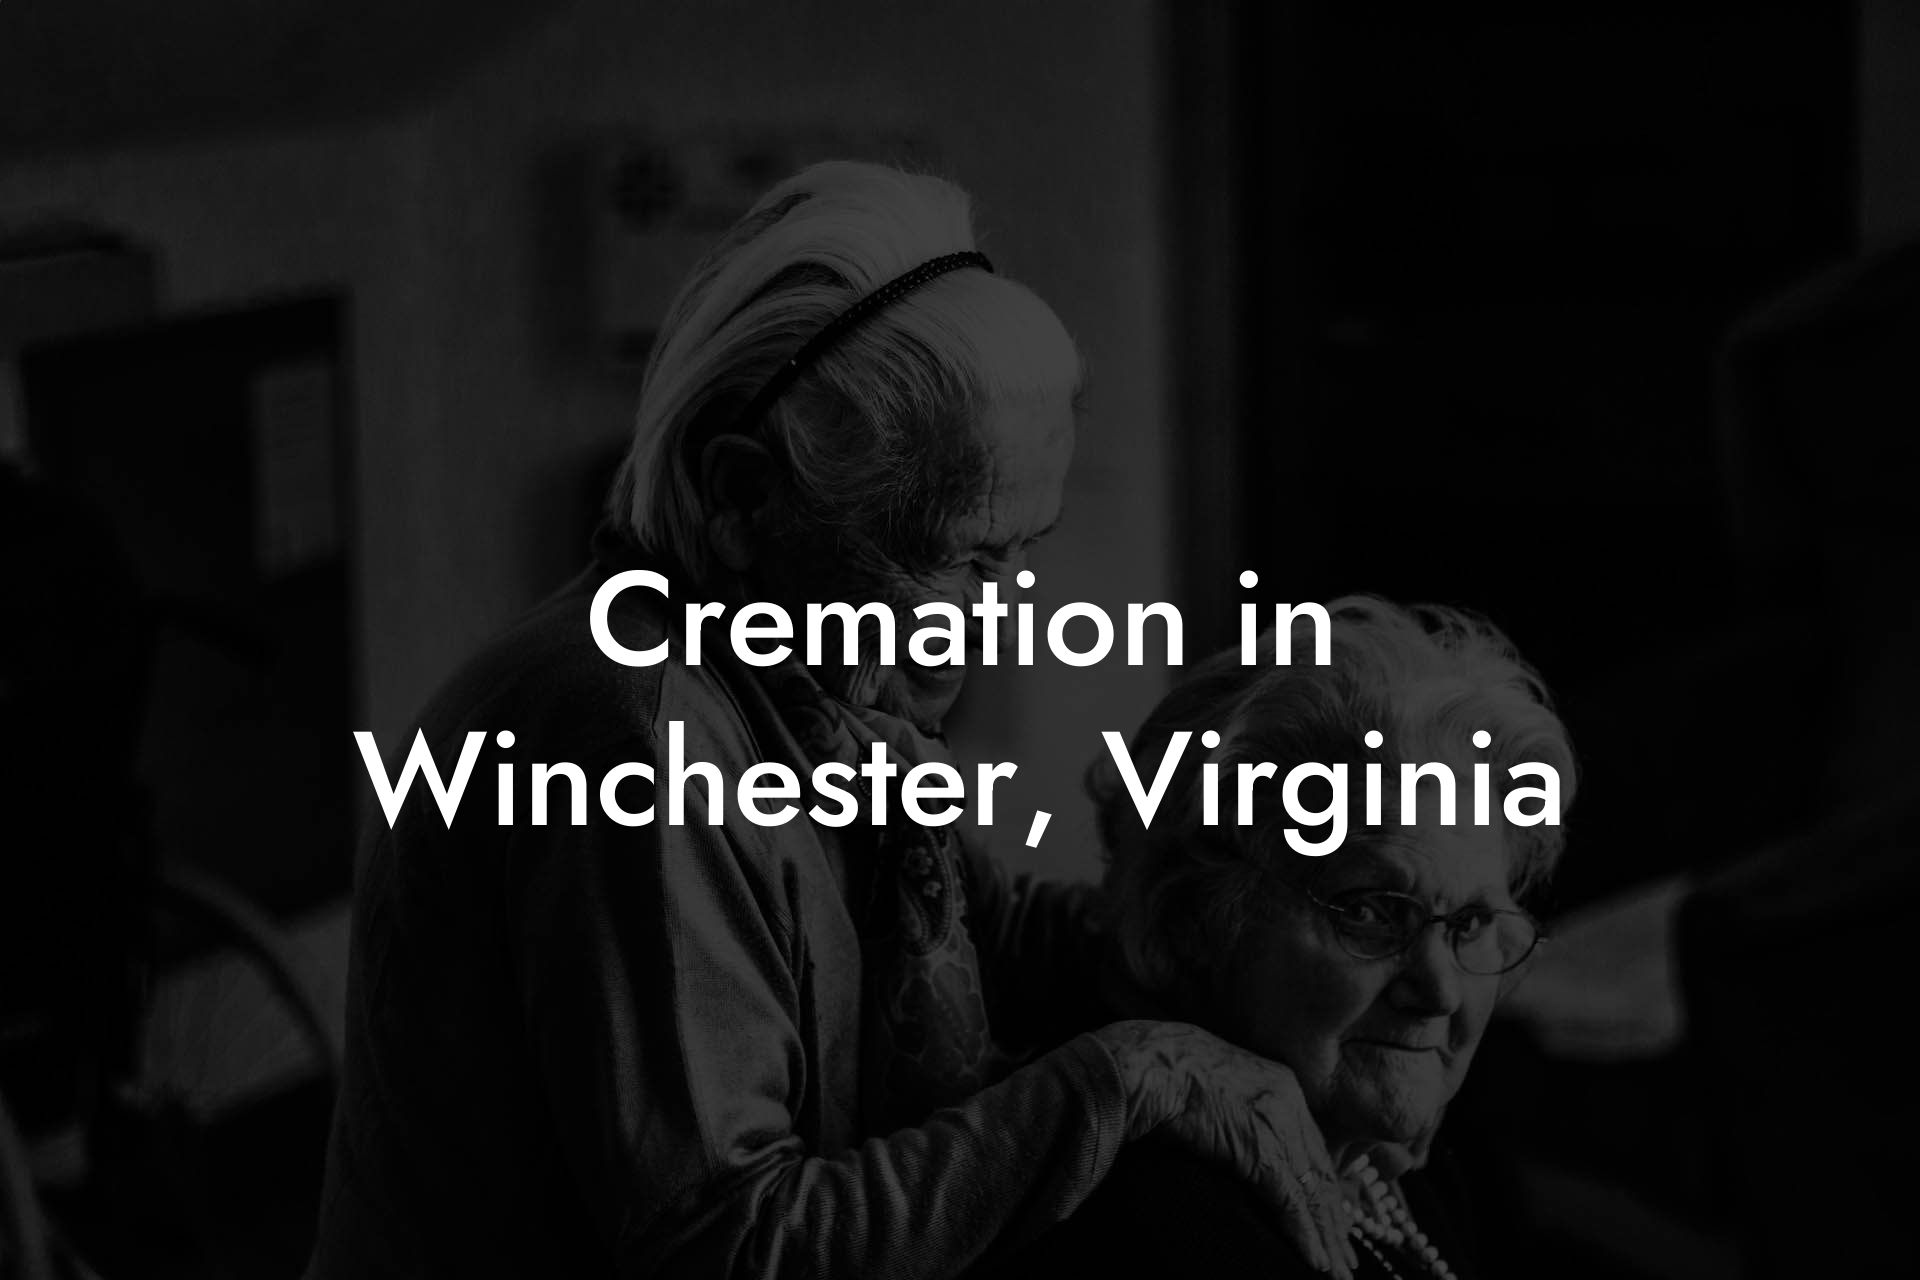 Cremation in Winchester, Virginia